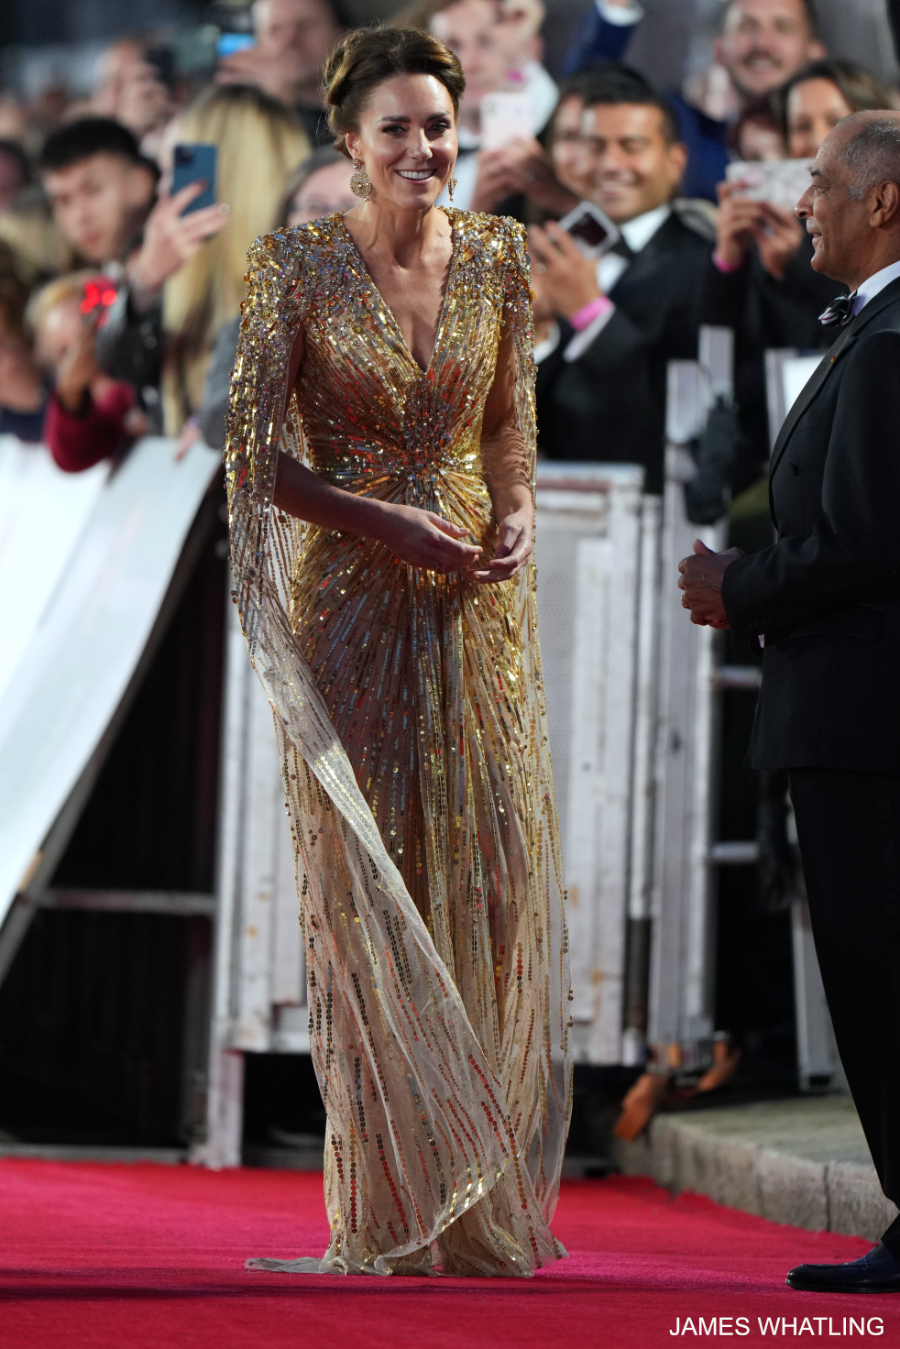 Dressed head to toe in gold, the Princess of Wales at the James Bond Premiere.